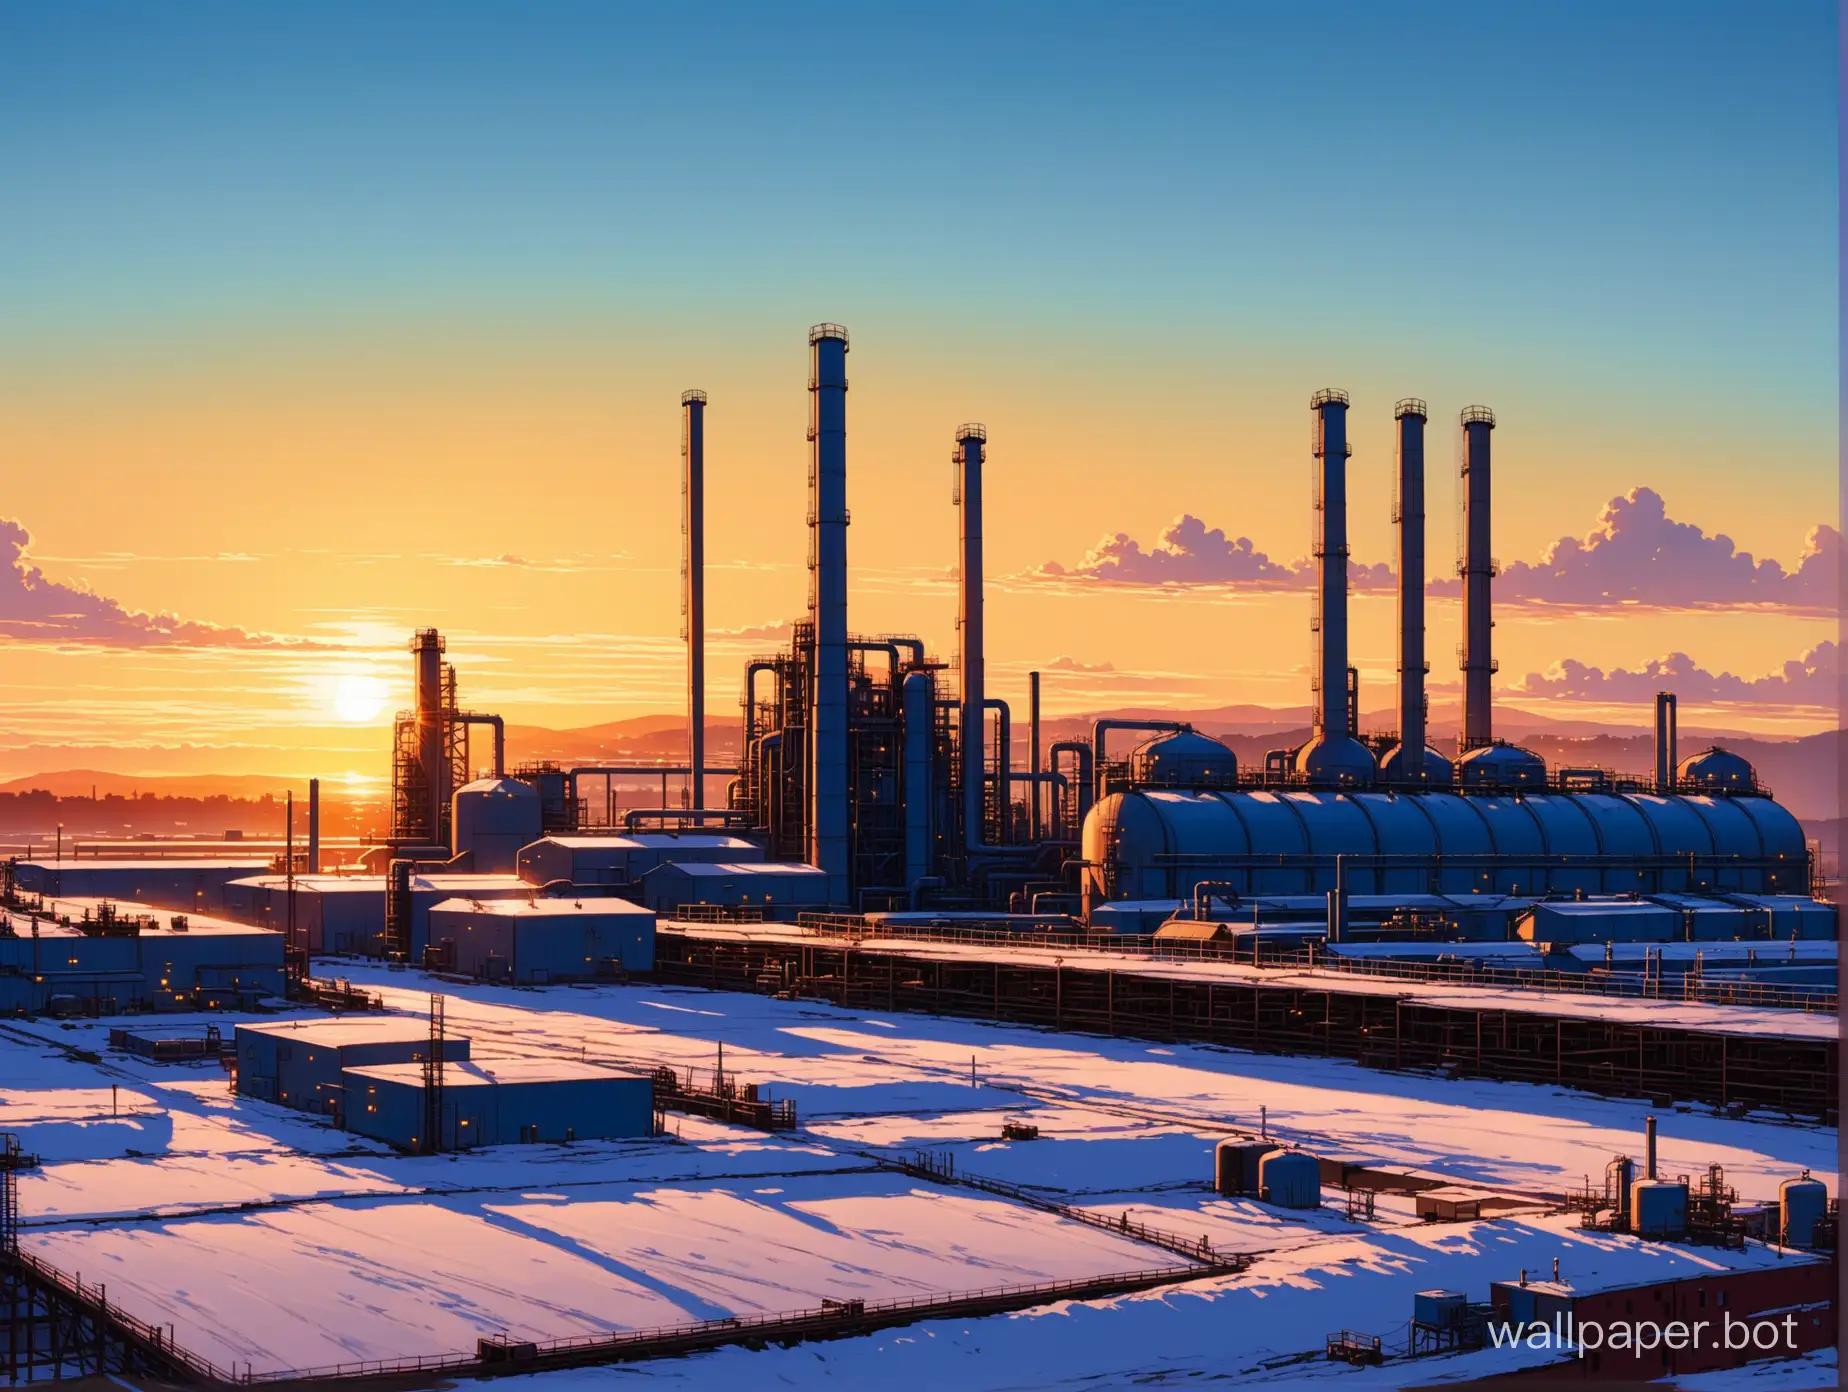 bluer refinery image artistic